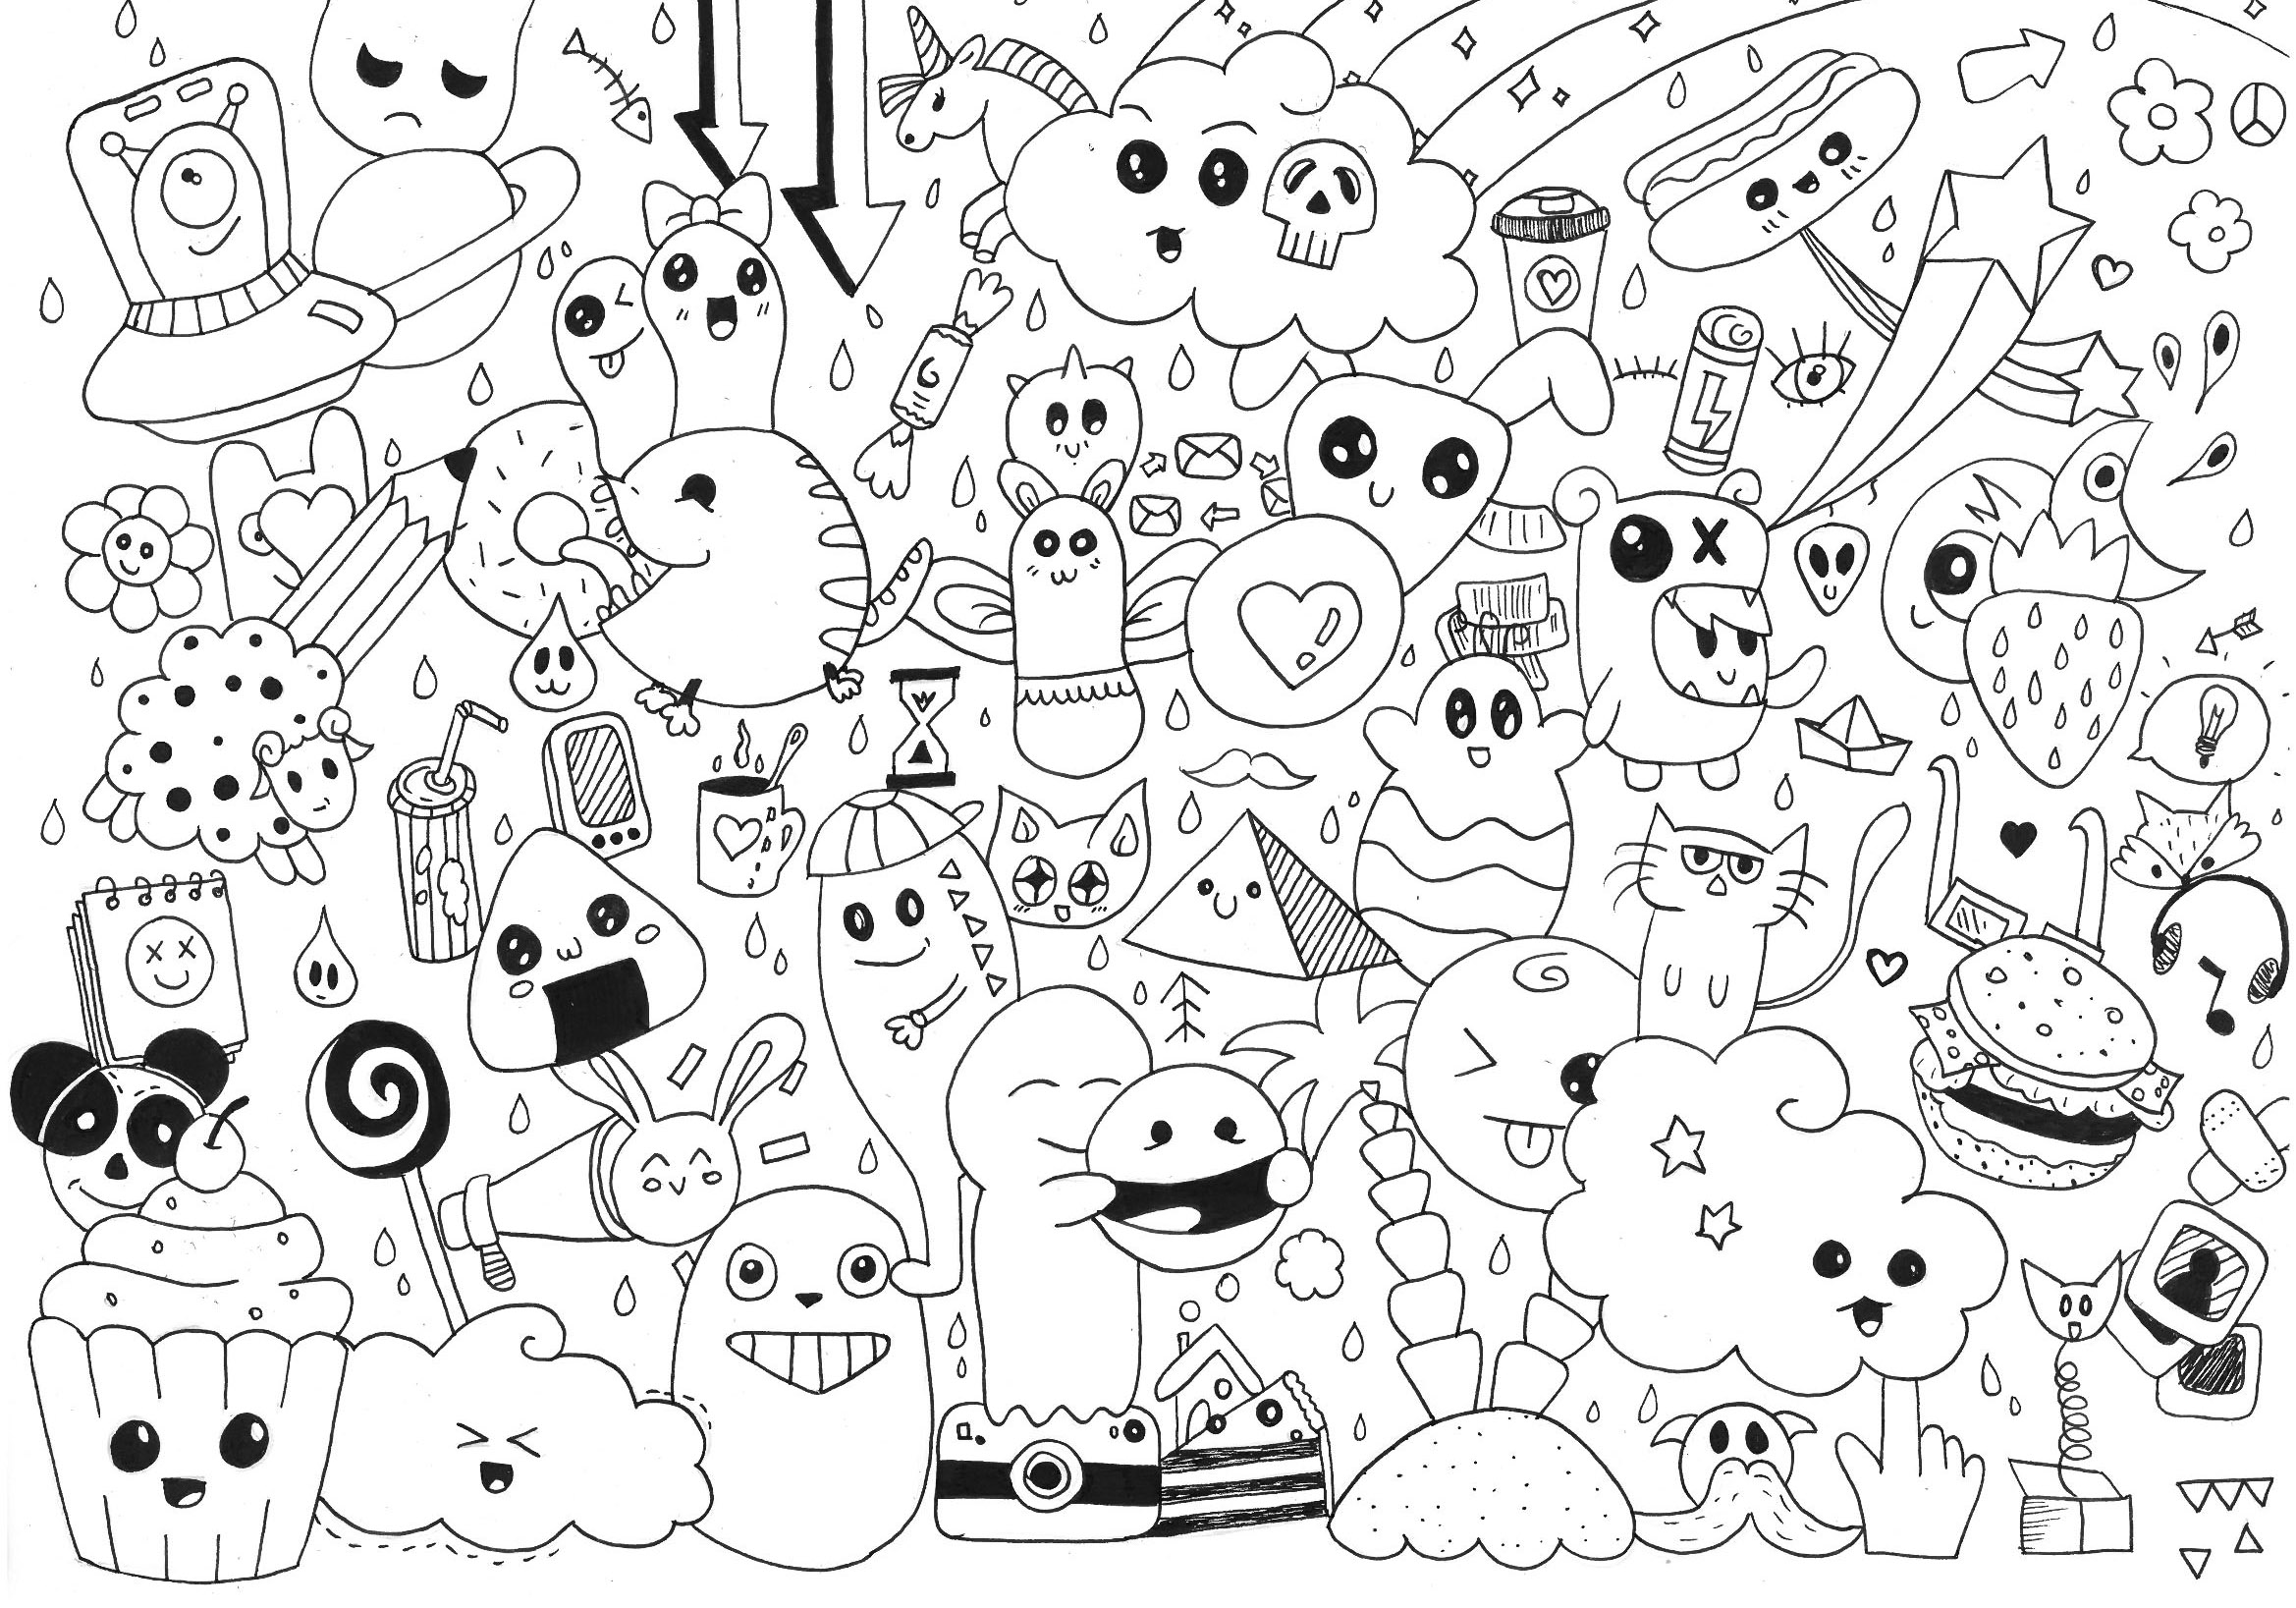 Free Printable Doodle Templates